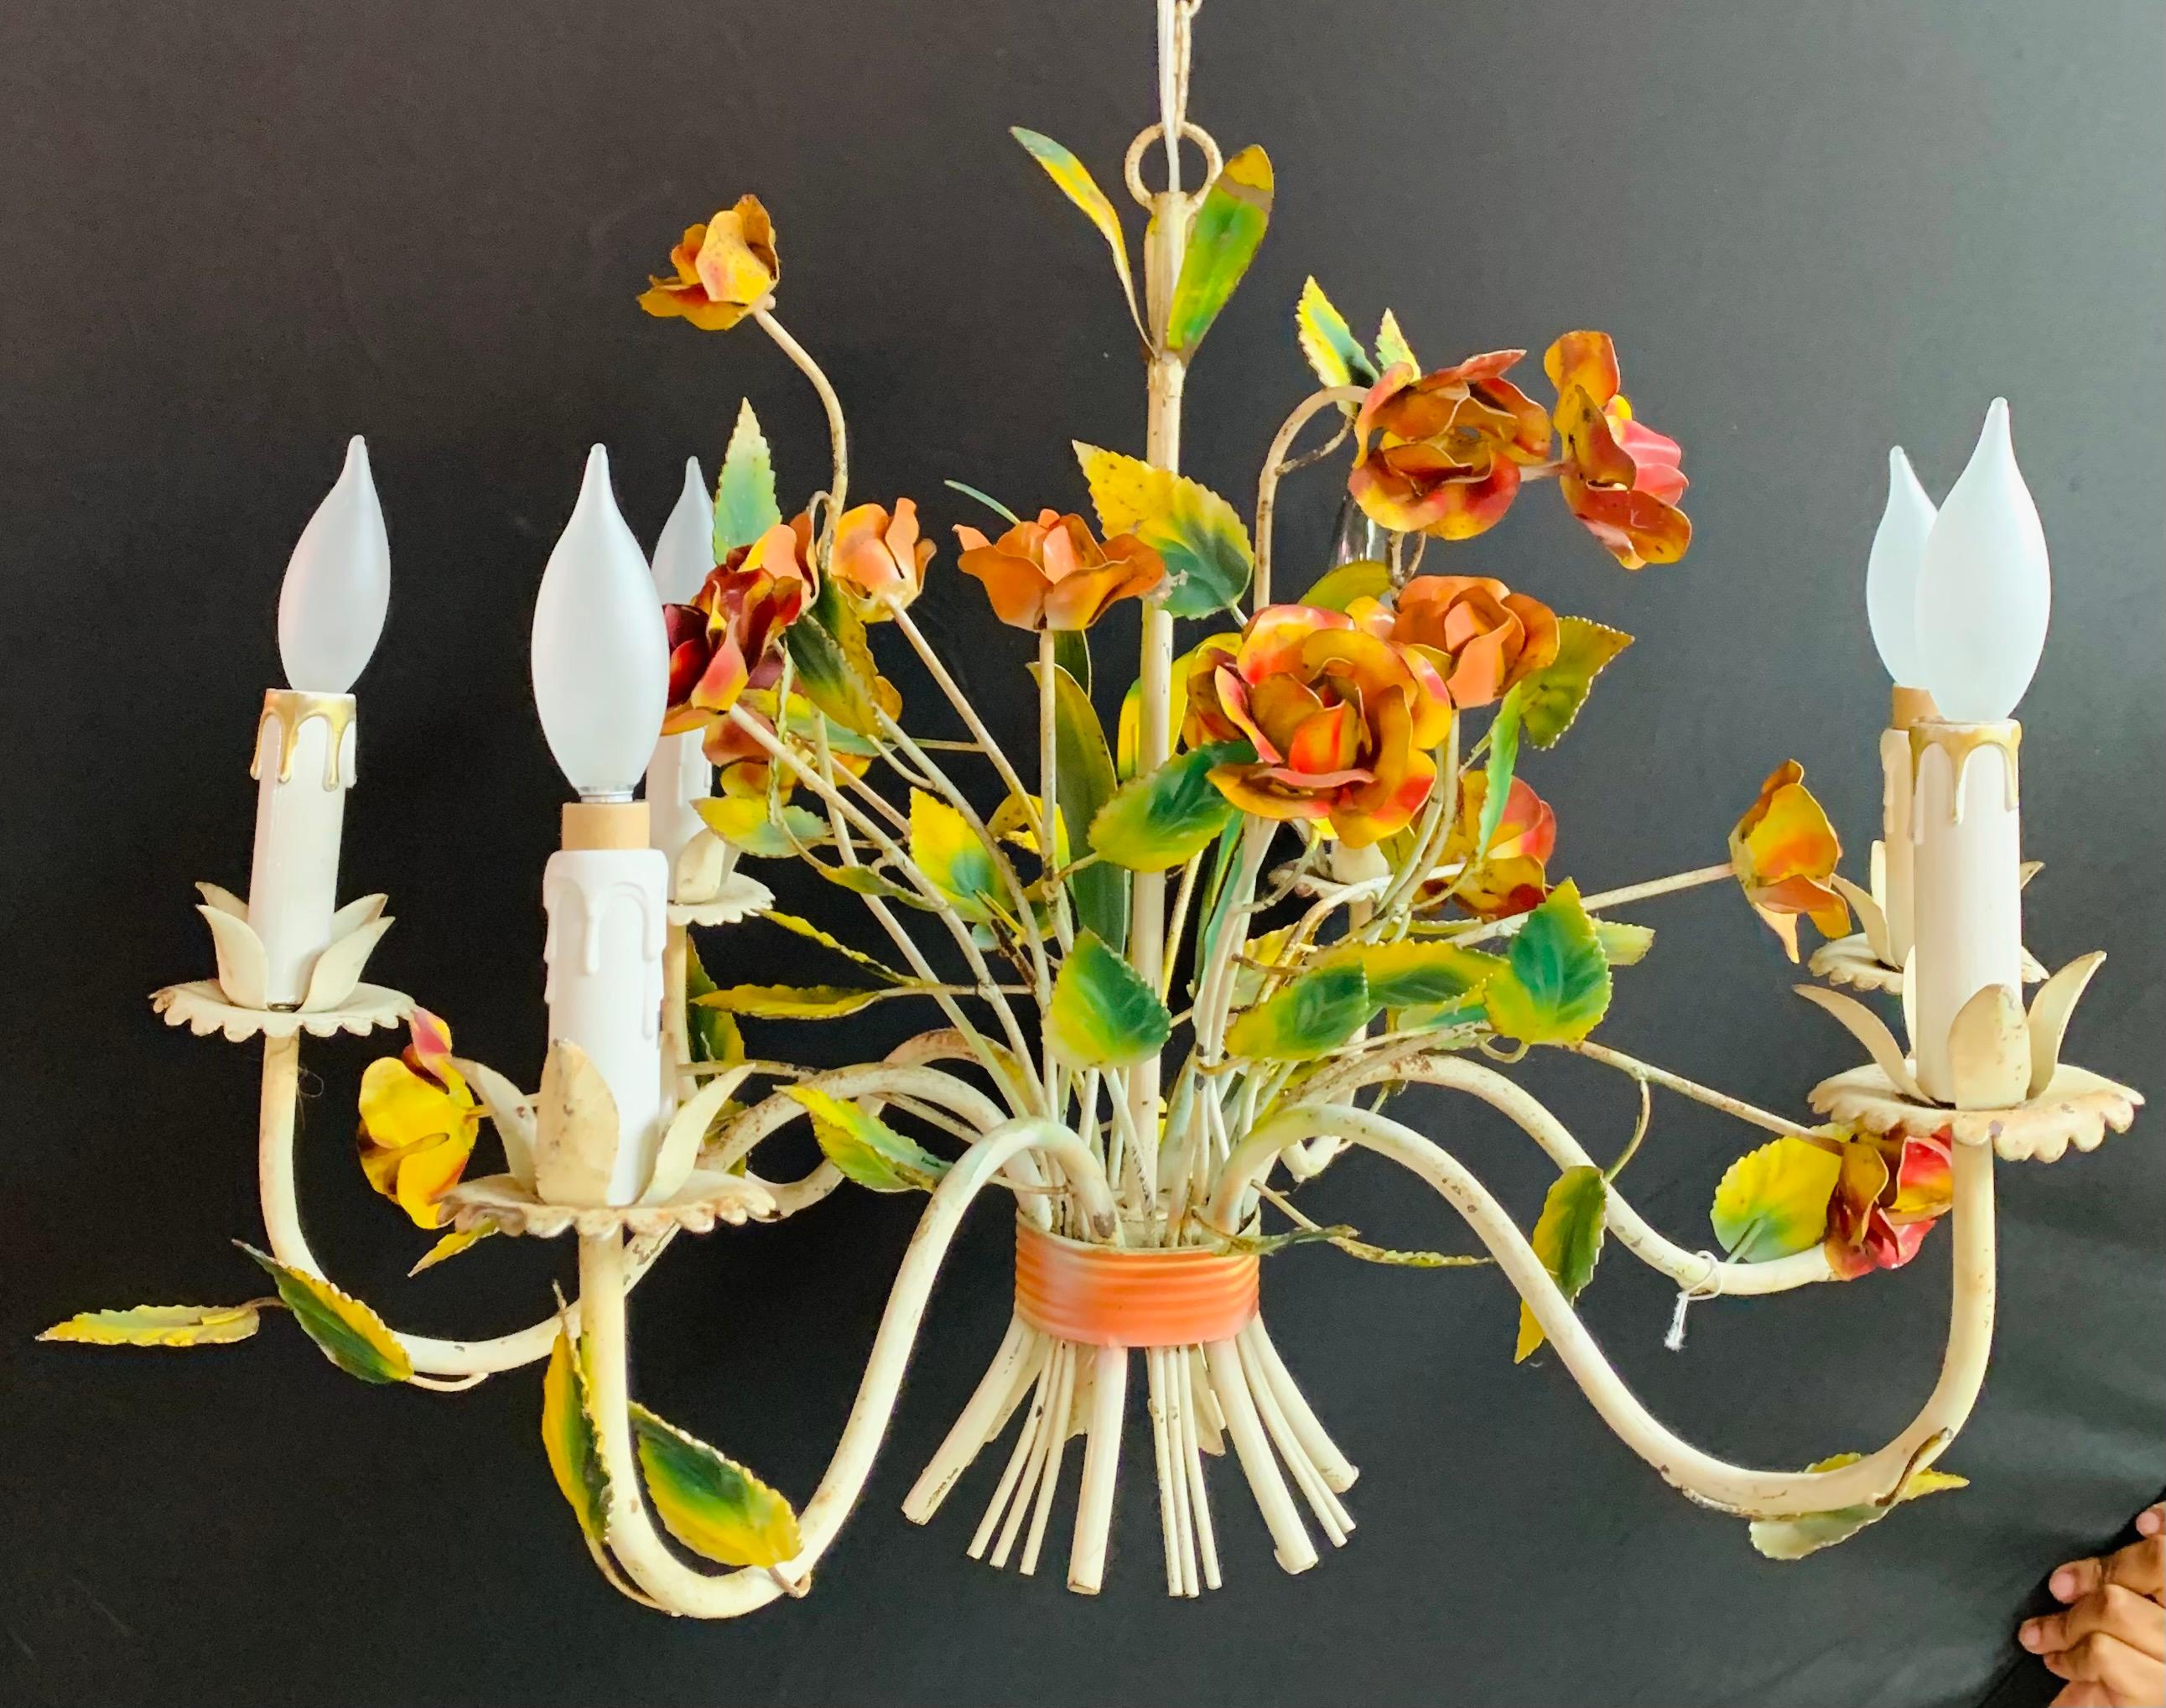 This cheerful Italian boho chic tole metal hand painted chandelier with six arms will bring light and style to any living space. Skillfully handcrafted of tole metal in the shape of beautiful flowers bouquet and hand painted in green, orange/